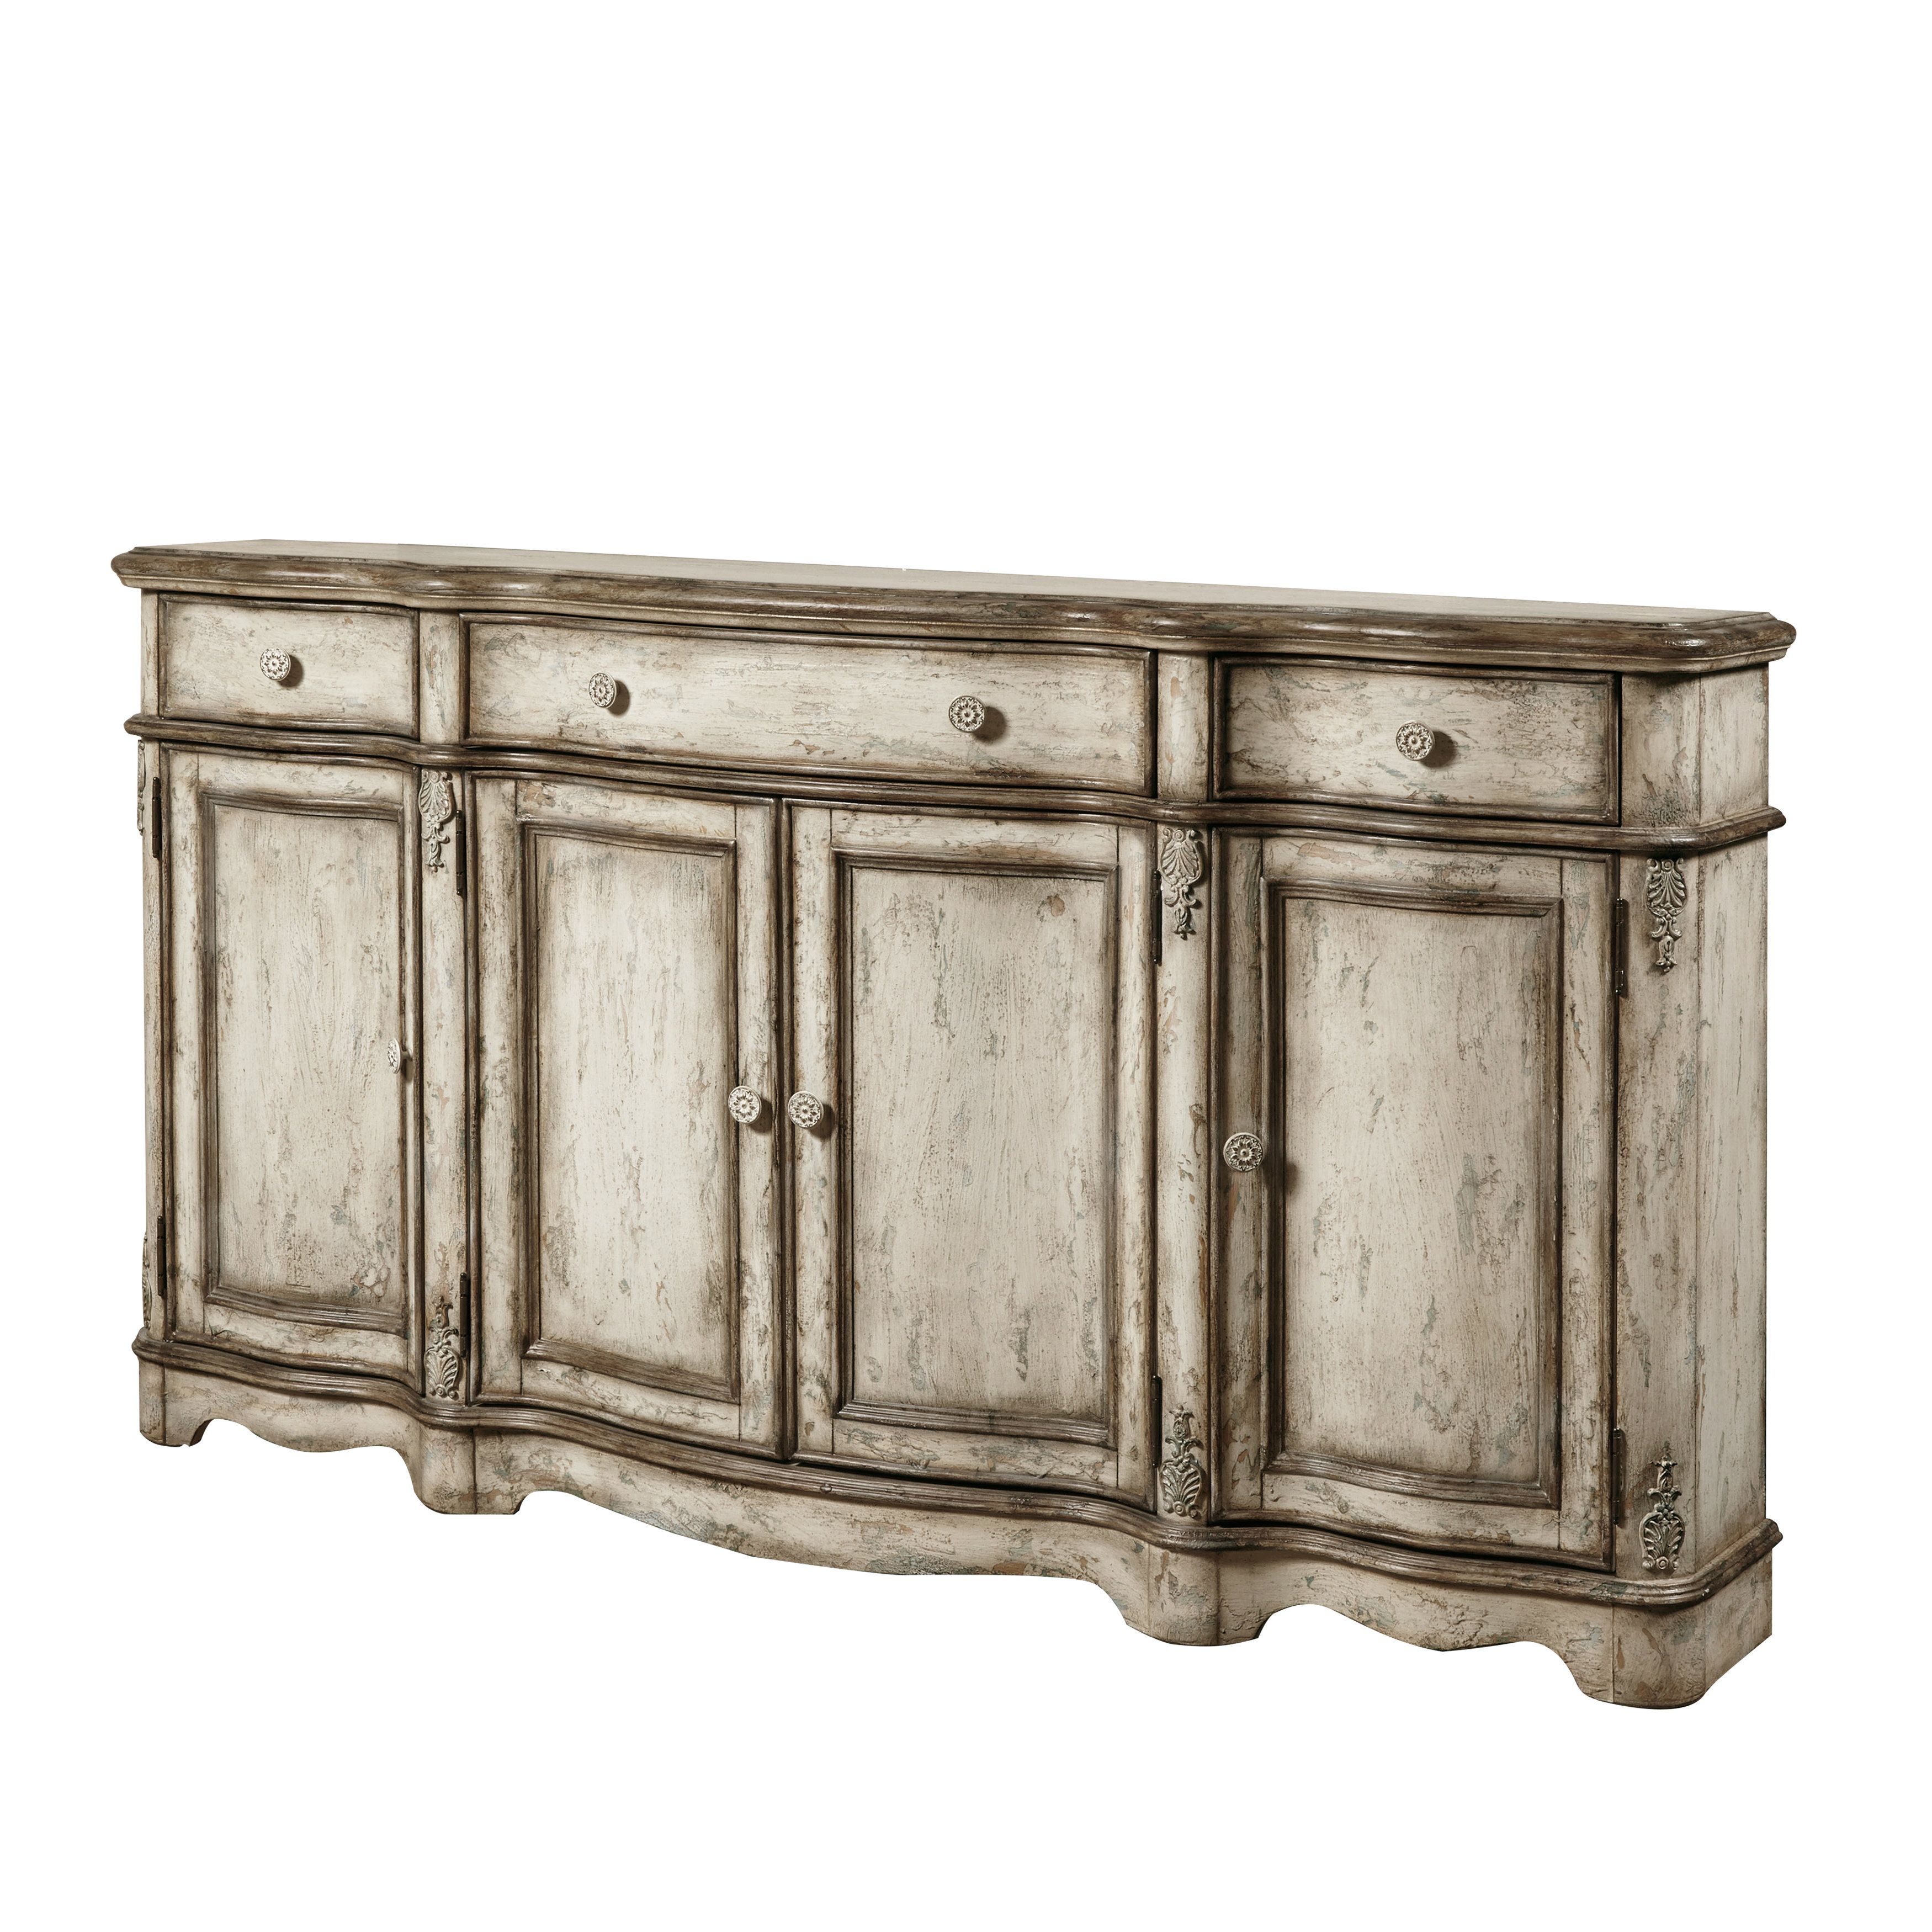 Lark Manor Ilyan Traditional Wood Sideboard & Reviews | Wayfair Throughout Best And Newest Dormer Sideboards (View 5 of 20)